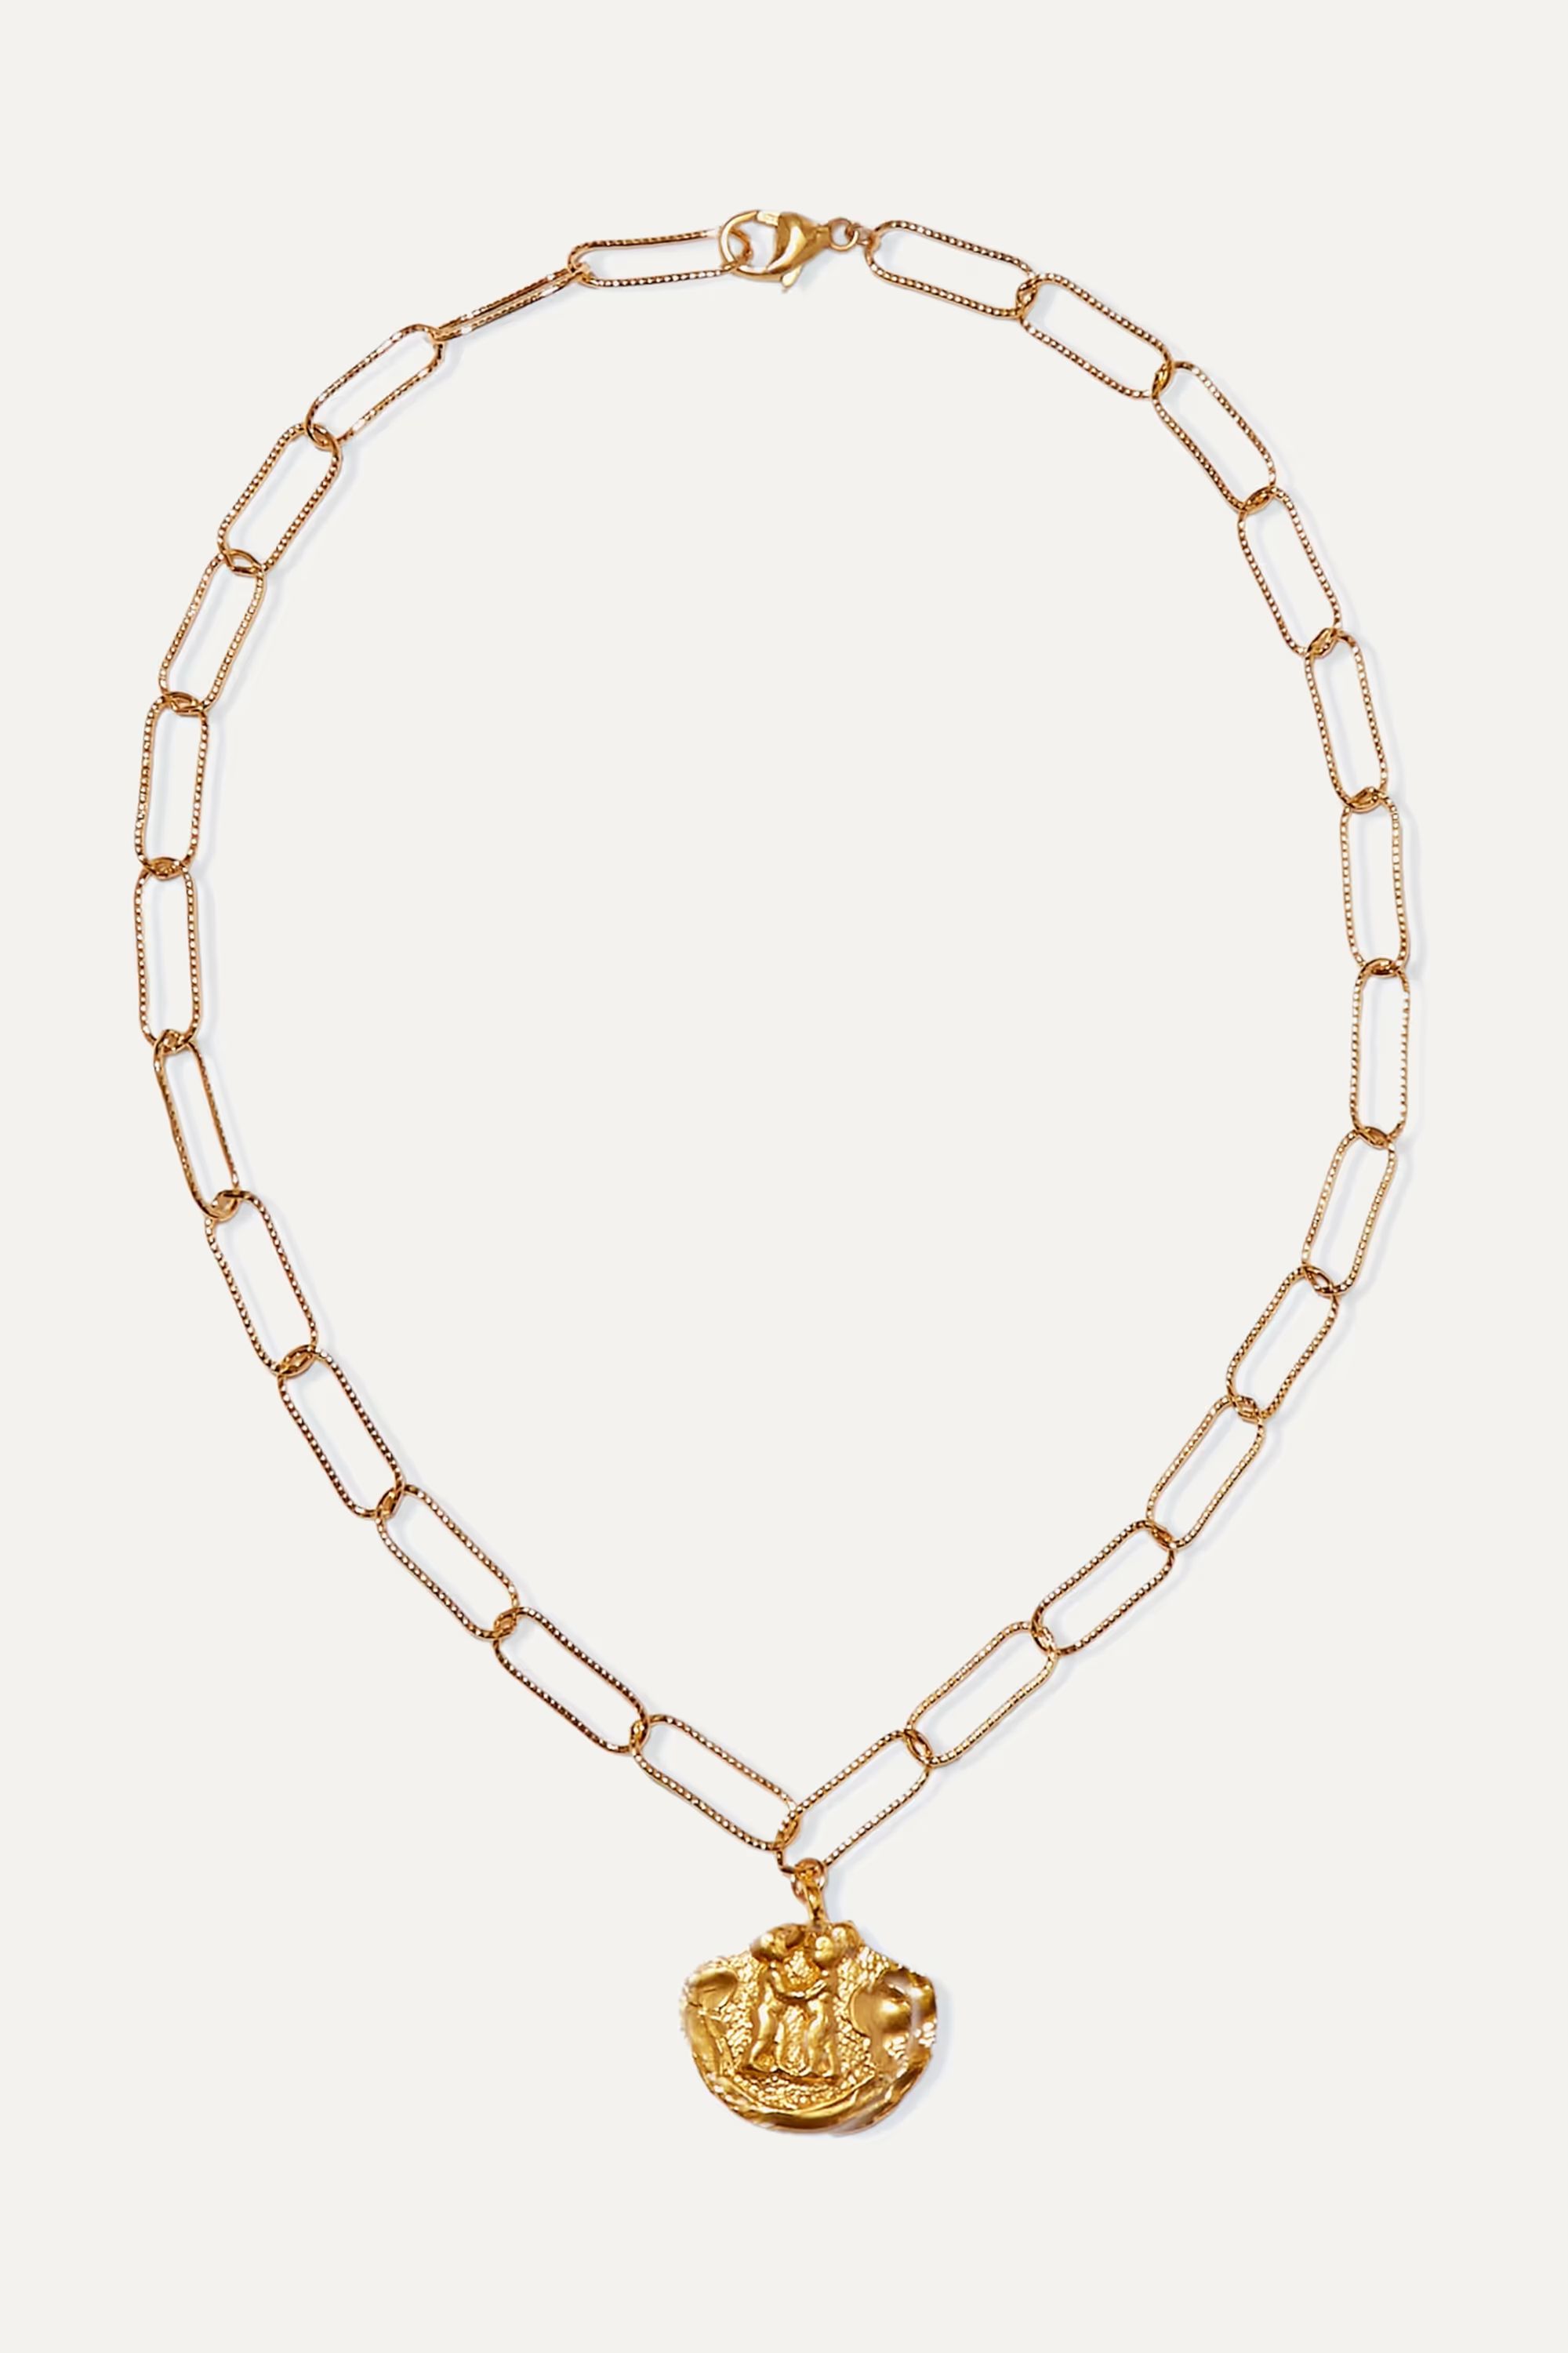 Gold Paola and Francesca gold-plated necklace | ALIGHIERI | NET-A-PORTER | NET-A-PORTER (US)